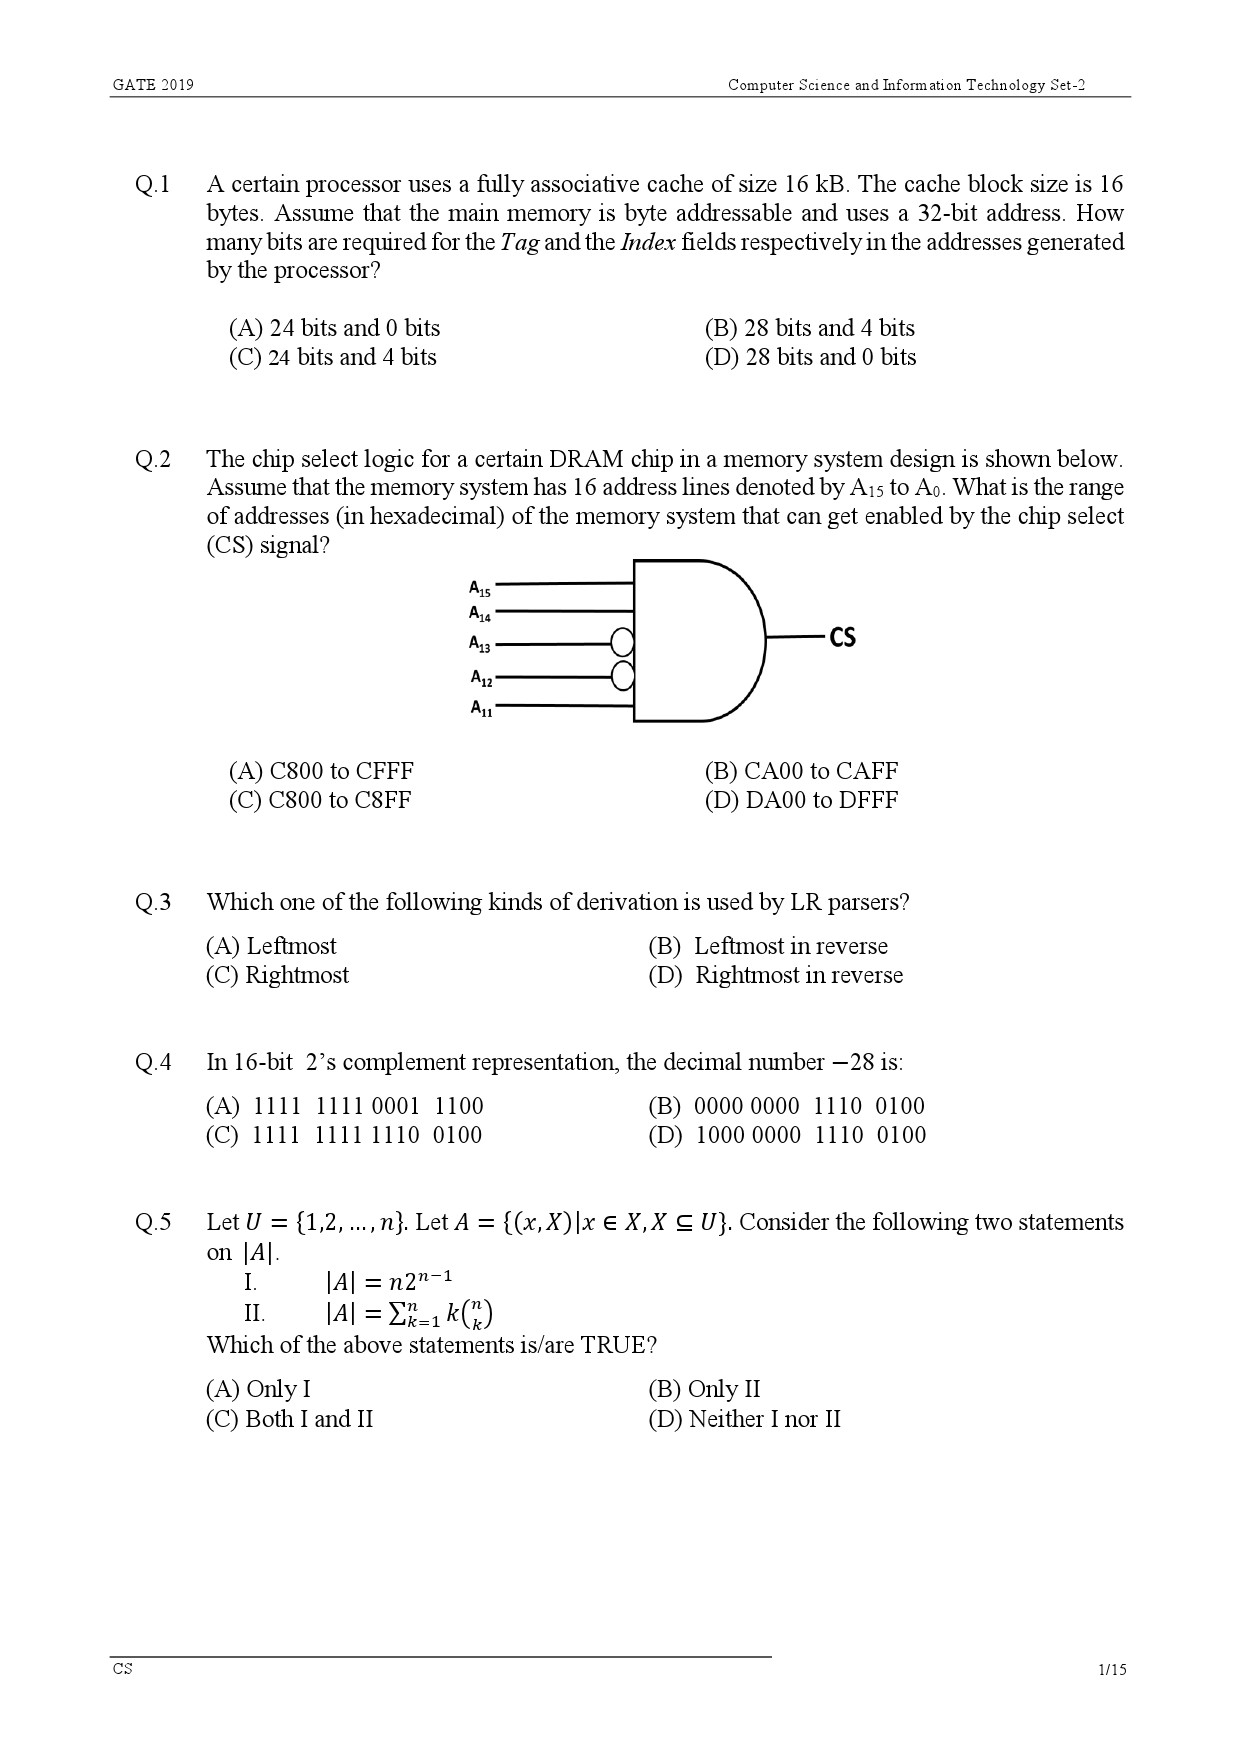 GATE Exam Question Paper 2019 Computer Science and Information Technology 4